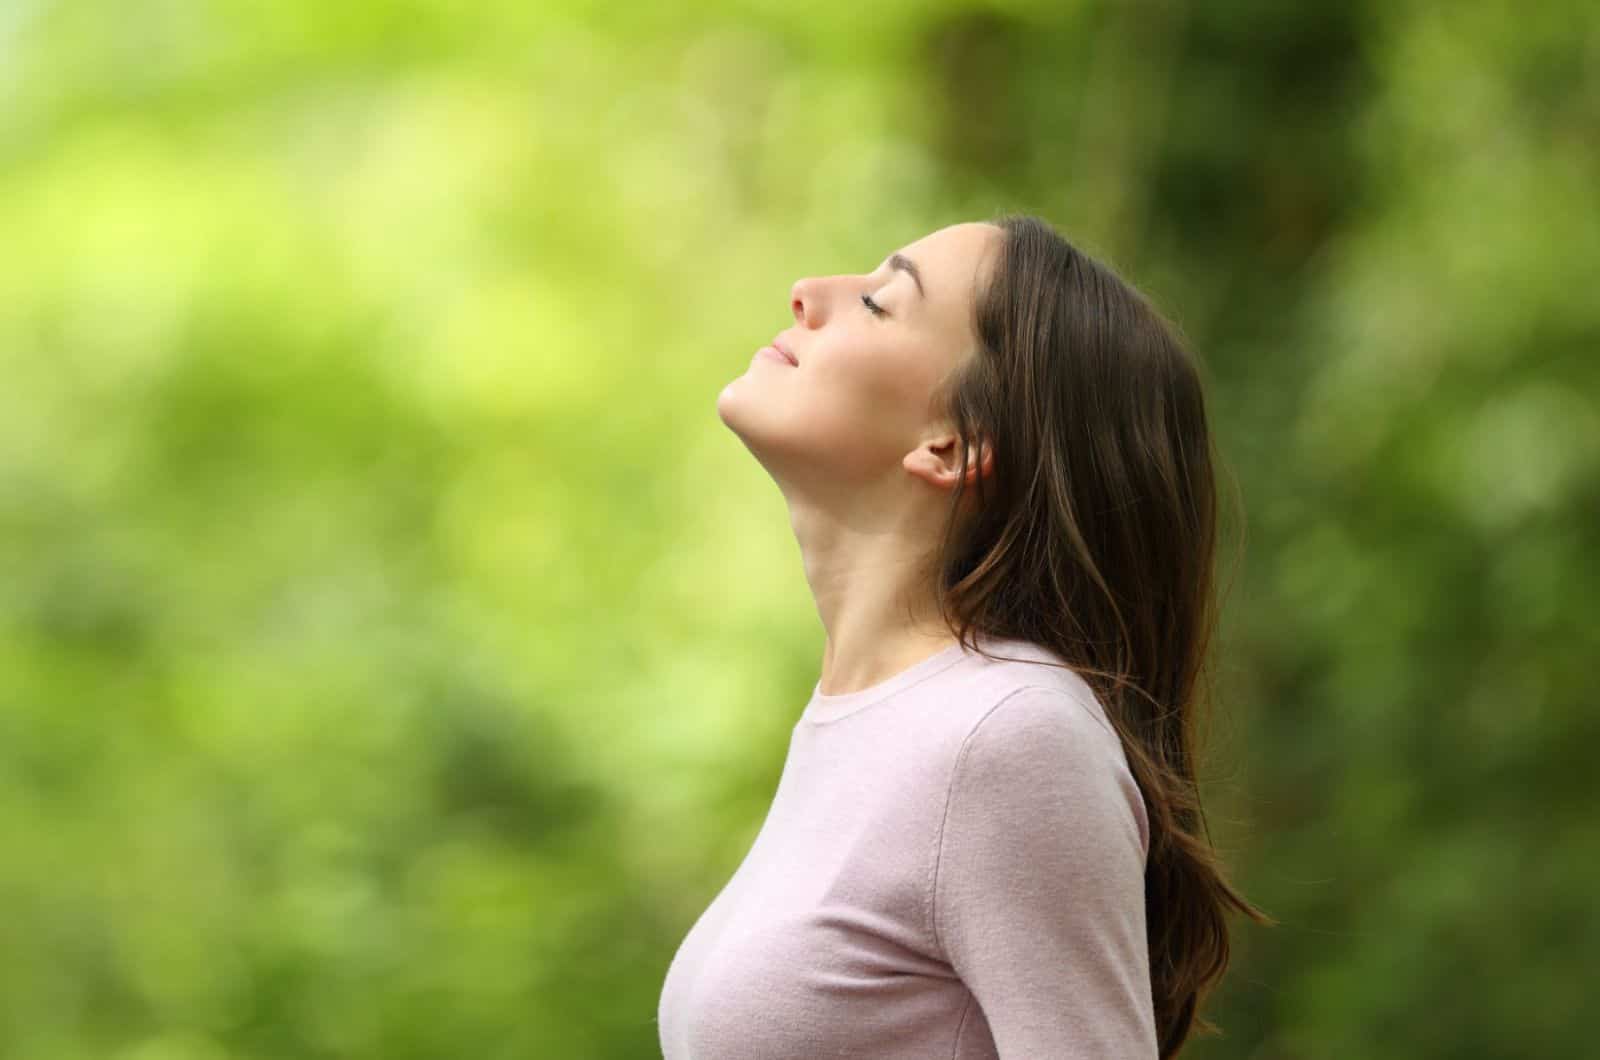 spiritual woman doing breathing exercises and affirmations in nature